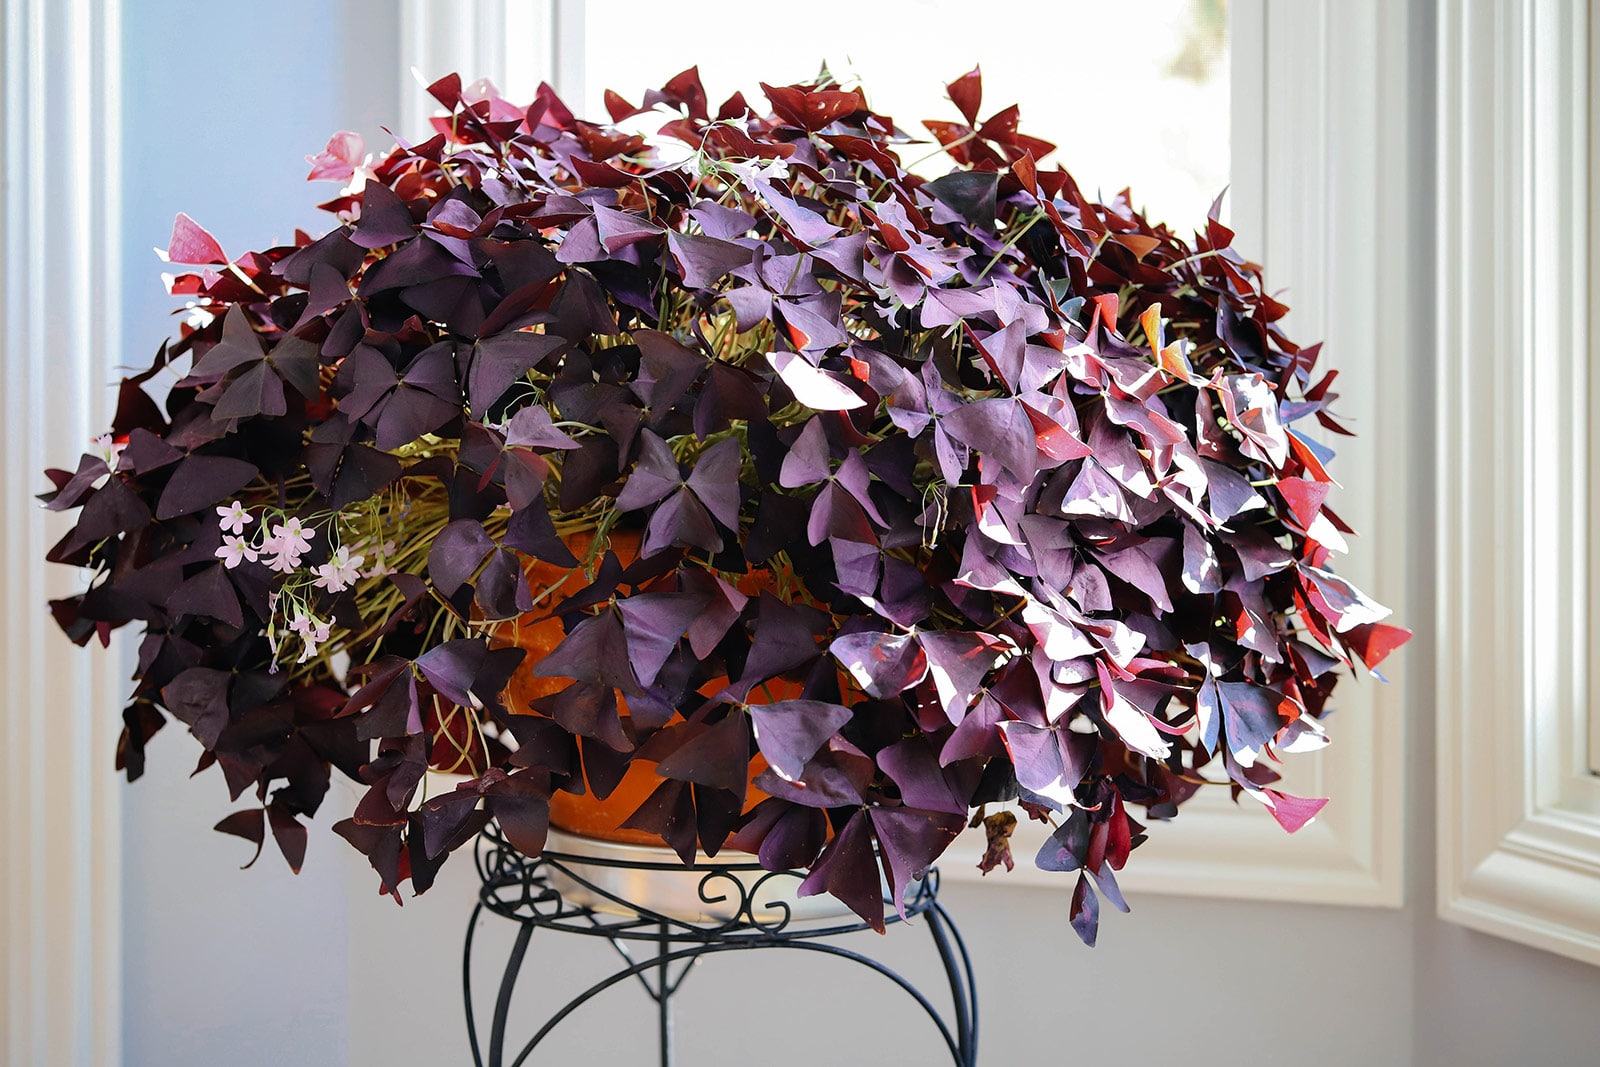 A mature Oxalis triangularis (purple shamrock) houseplant in an elevated pot displayed next to windows in a house